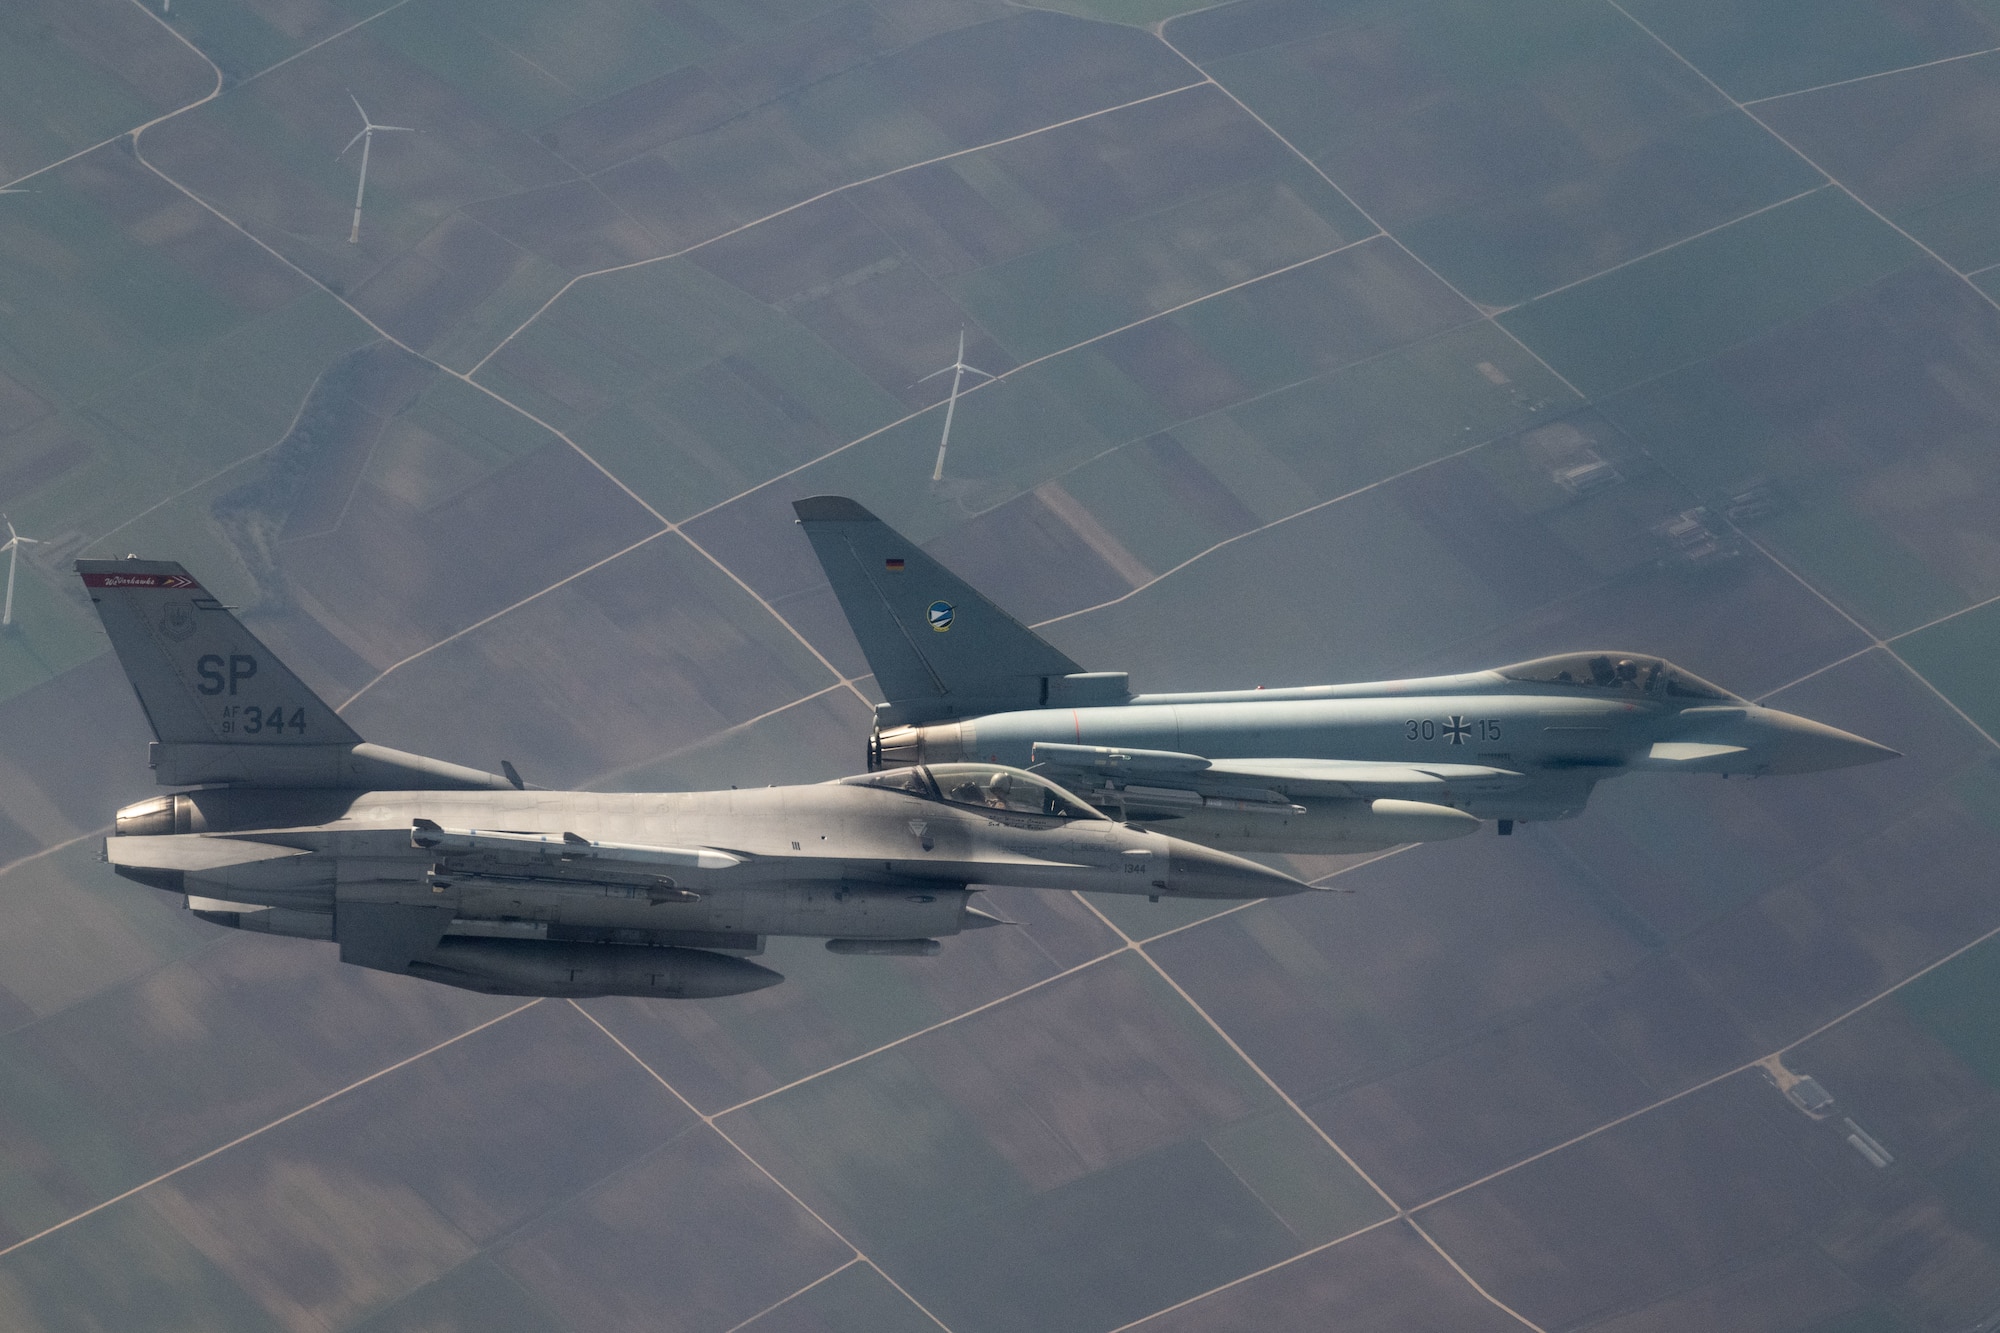 A U.S. Air Force F-16 Fighting Falcon assigned to the 480th Fighter Squadron at Spangdahlem Air Base, Germany (left), flies alongside a German air force Eurofighter Typhoon assigned to the 74th Tactical Air Wing over Germany, Feb. 16, 2023.